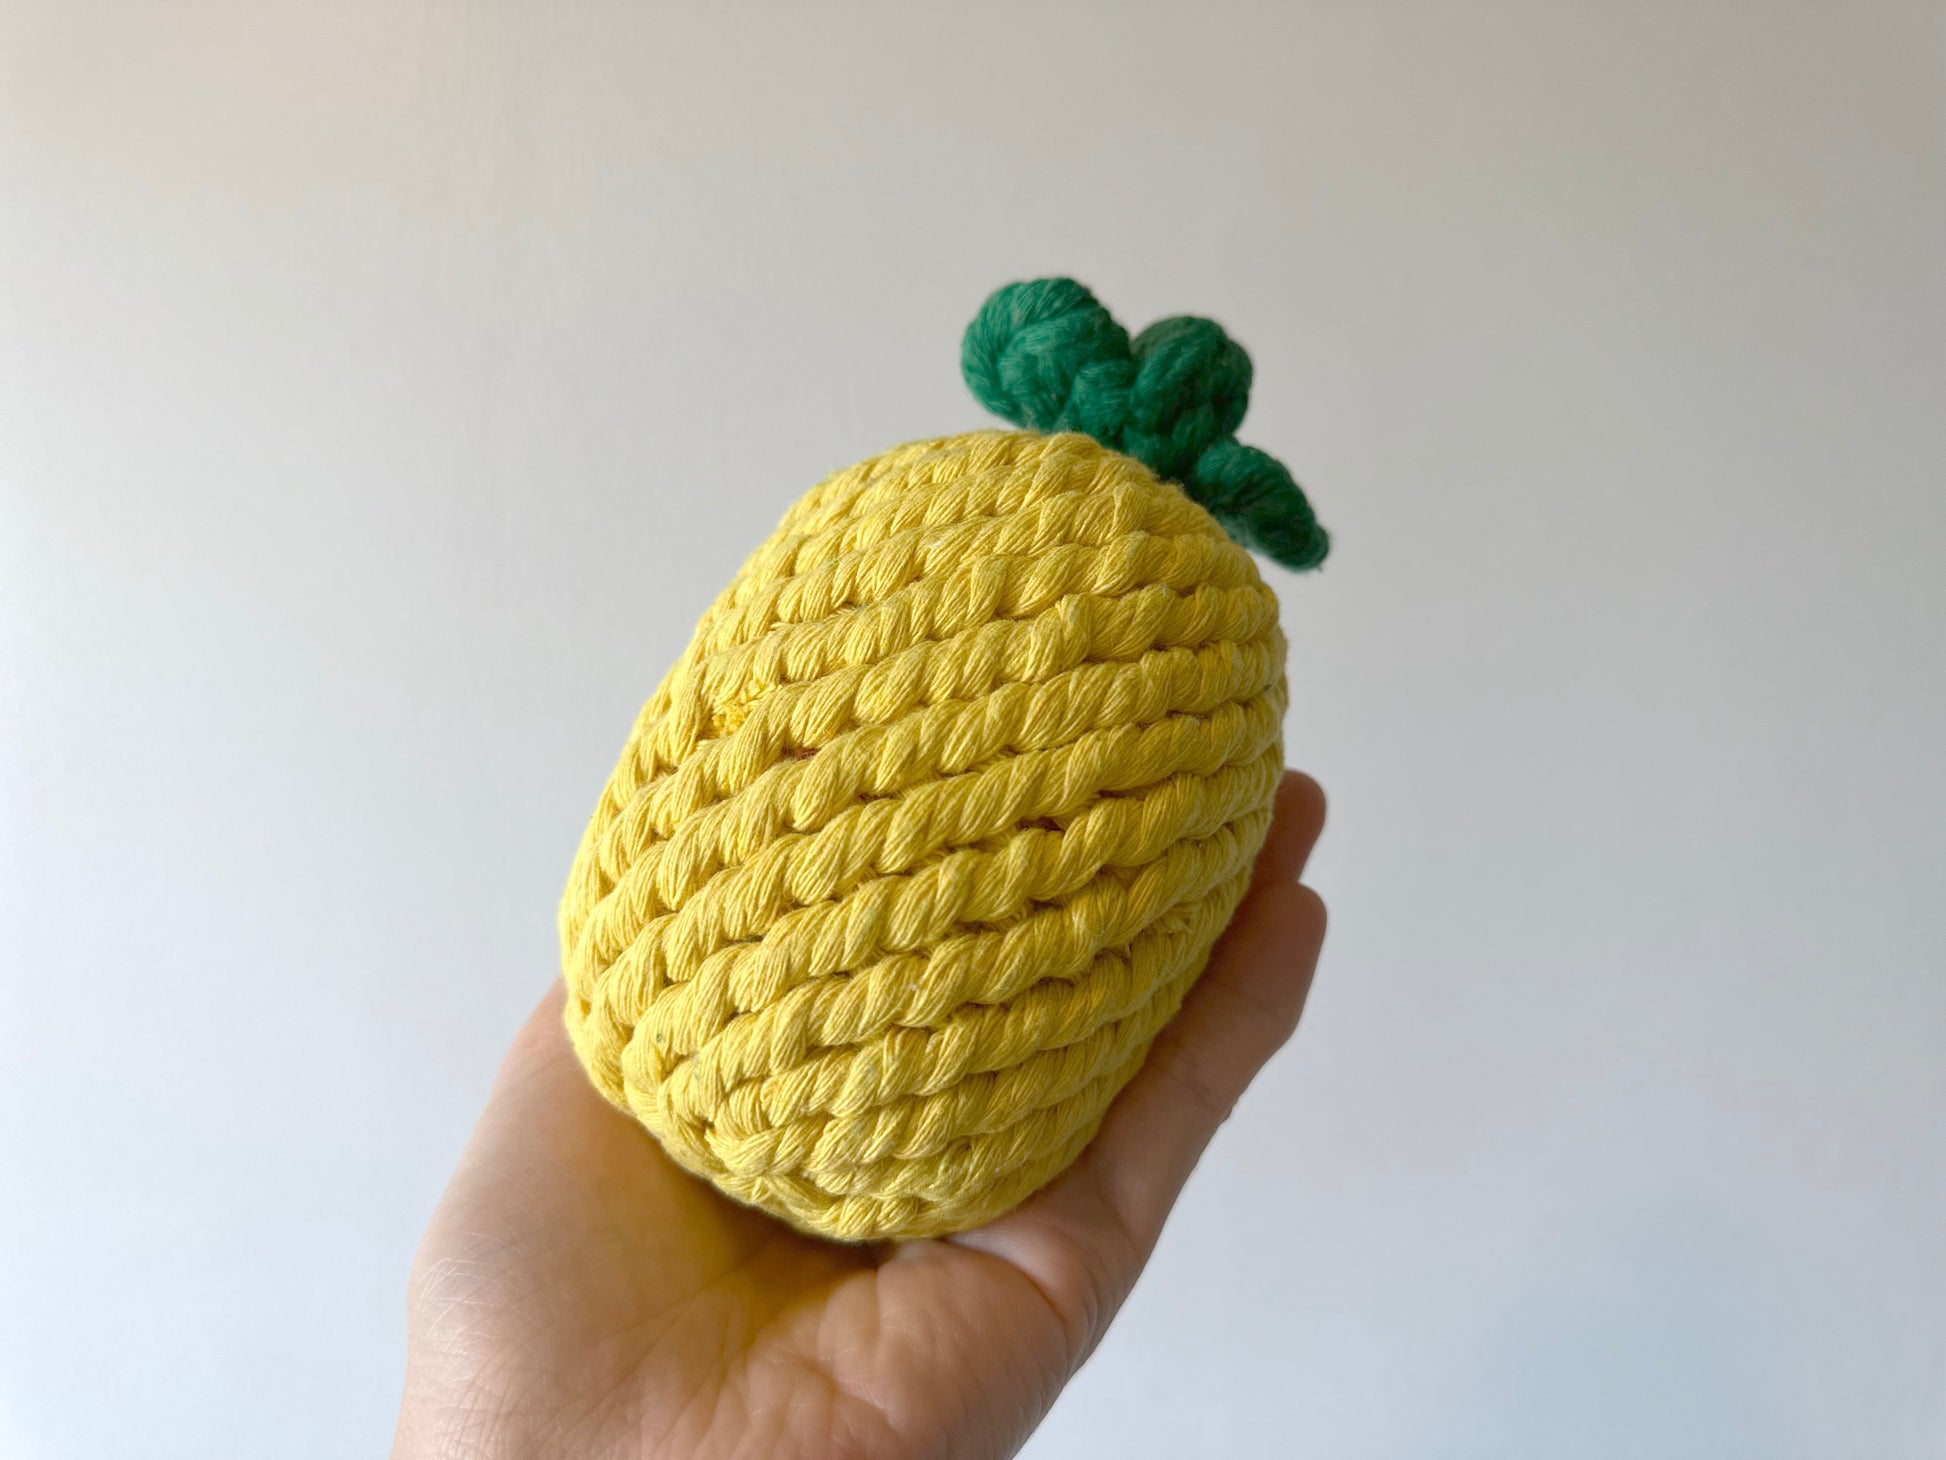 A pineapple-shaped pet toy made from durable cotton rope, perfect for chewing and interactive play, promoting dental health and keeping pets entertained.